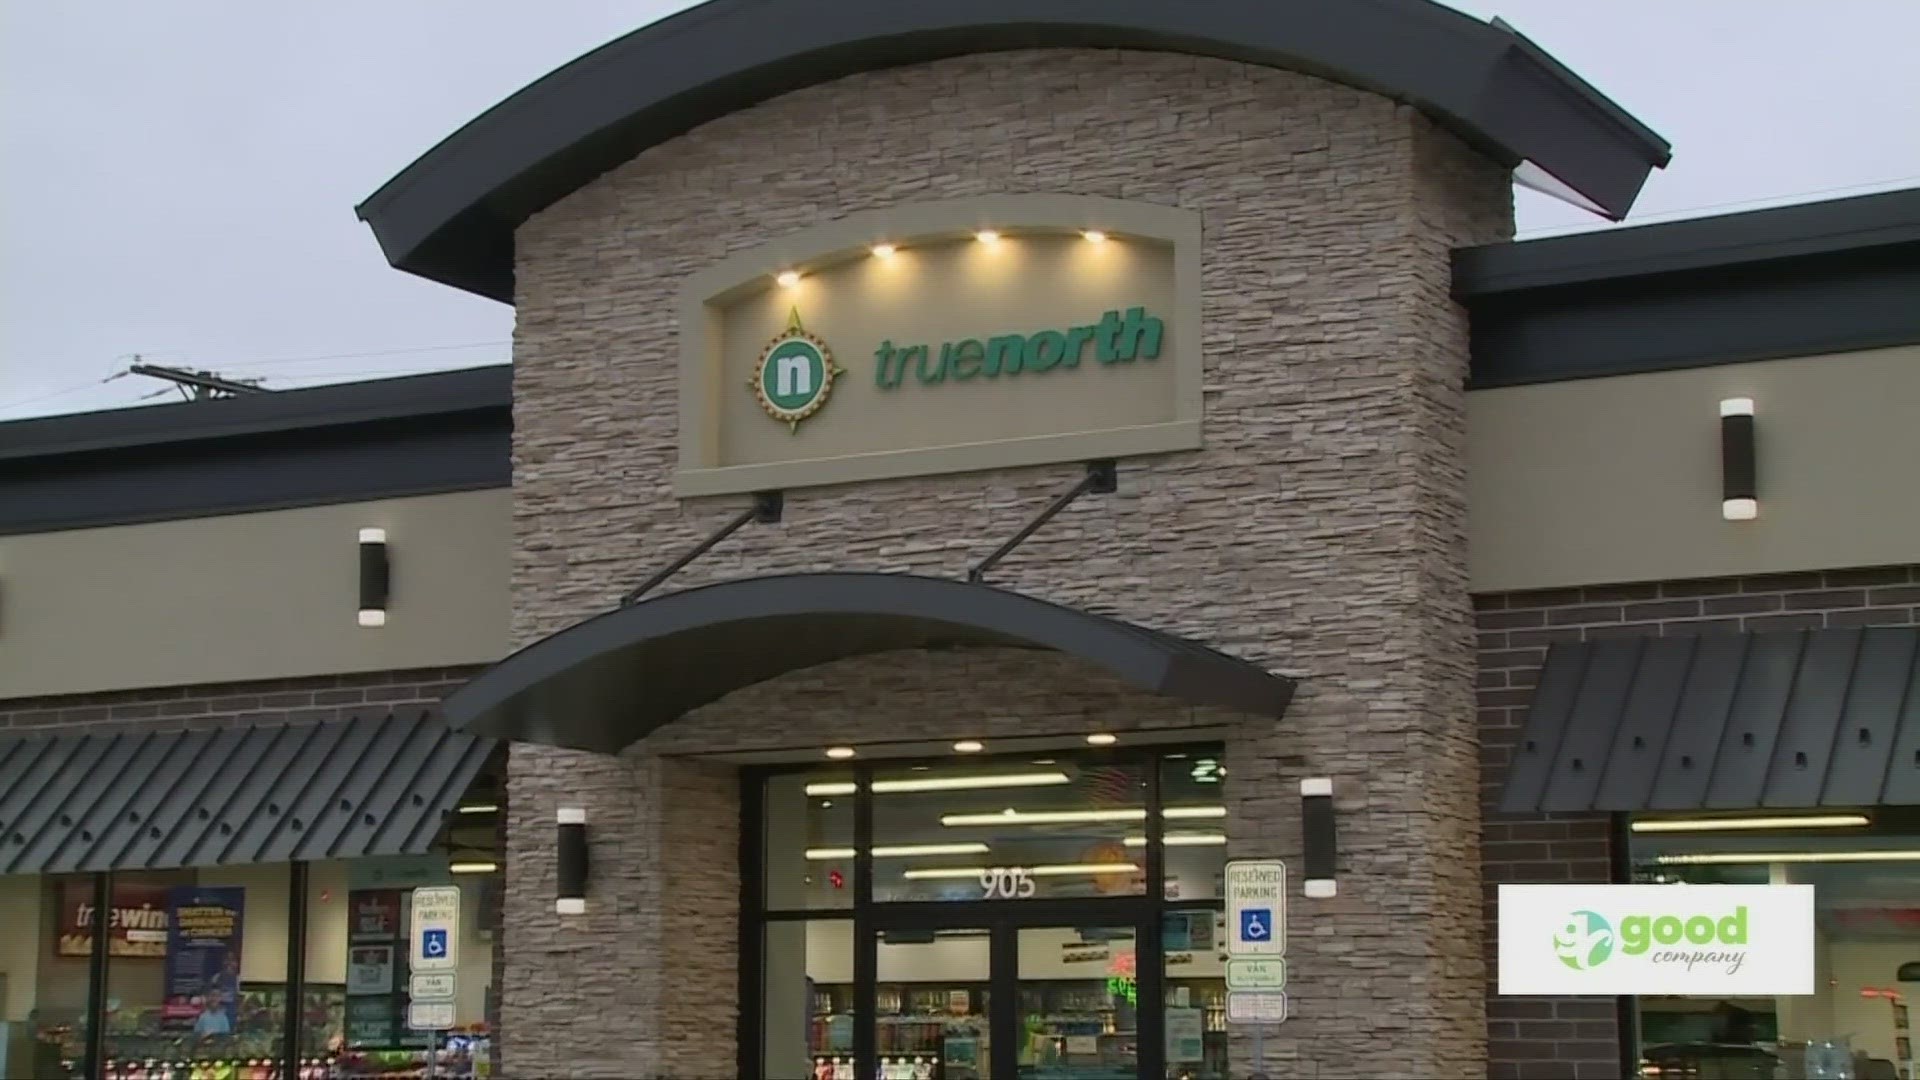 Joe heads to TrueNorth in Elyria to hand out some gift cards and smiles for some lucky customers! Sponsored by: TrueNorth